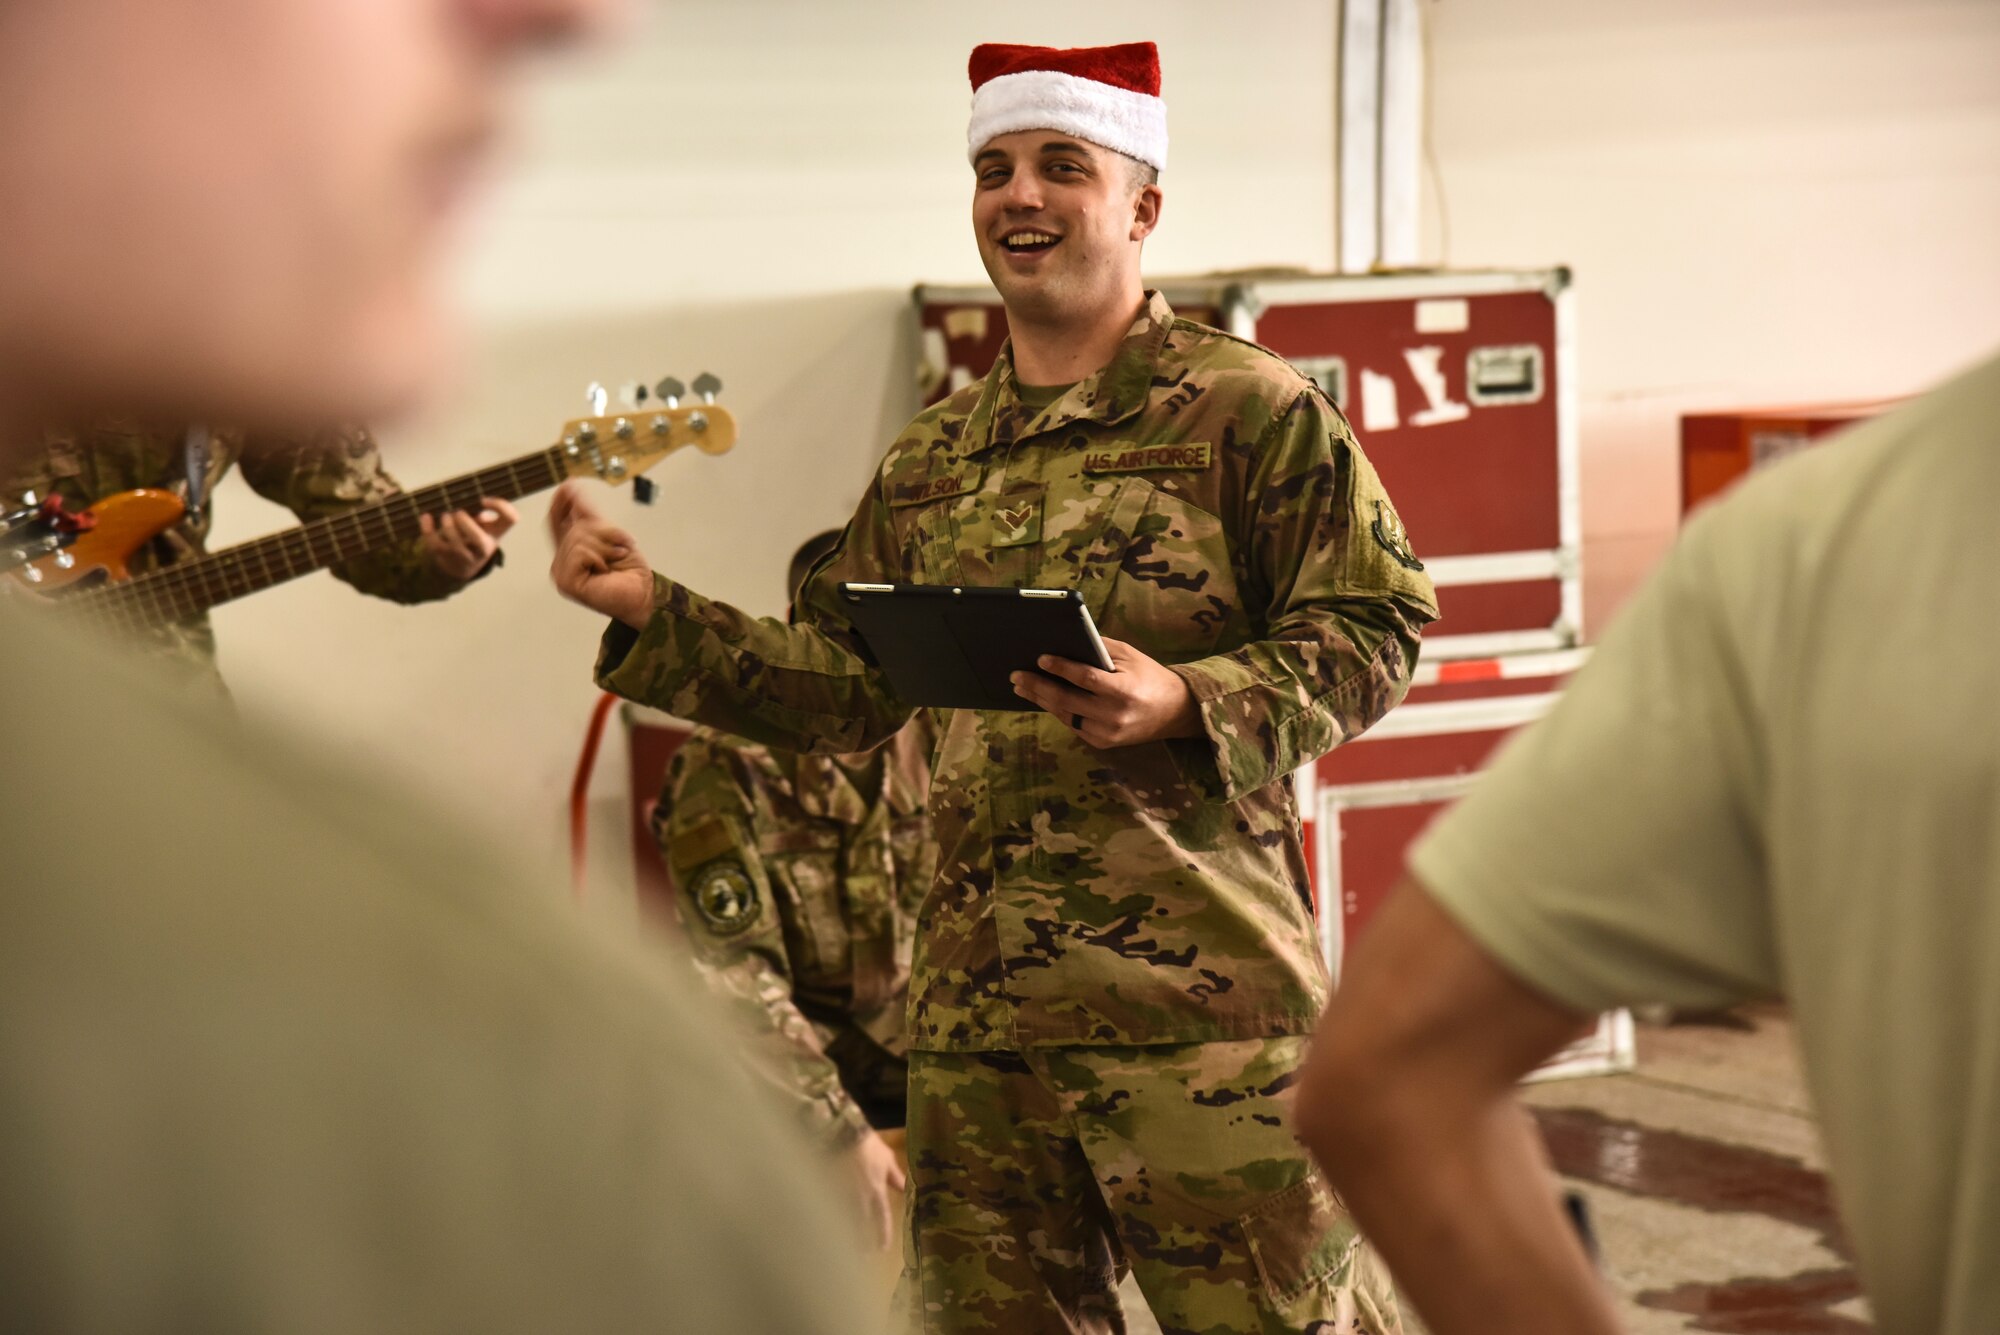 U.S. Air Force Senior Airman Derek Wilson, U.S. Air Forces Central Command Band vocalist, performs at Al Dhafra Air Base, United Arab Emirates, Dec. 4, 2018. The AFCENT Band rotates several ensembles through the area of responsibility that perform a wide variety of musical styles to appeal to audiences of all ages and backgrounds. (U.S. Air Force photo by Senior Airman Mya M. Crosby)